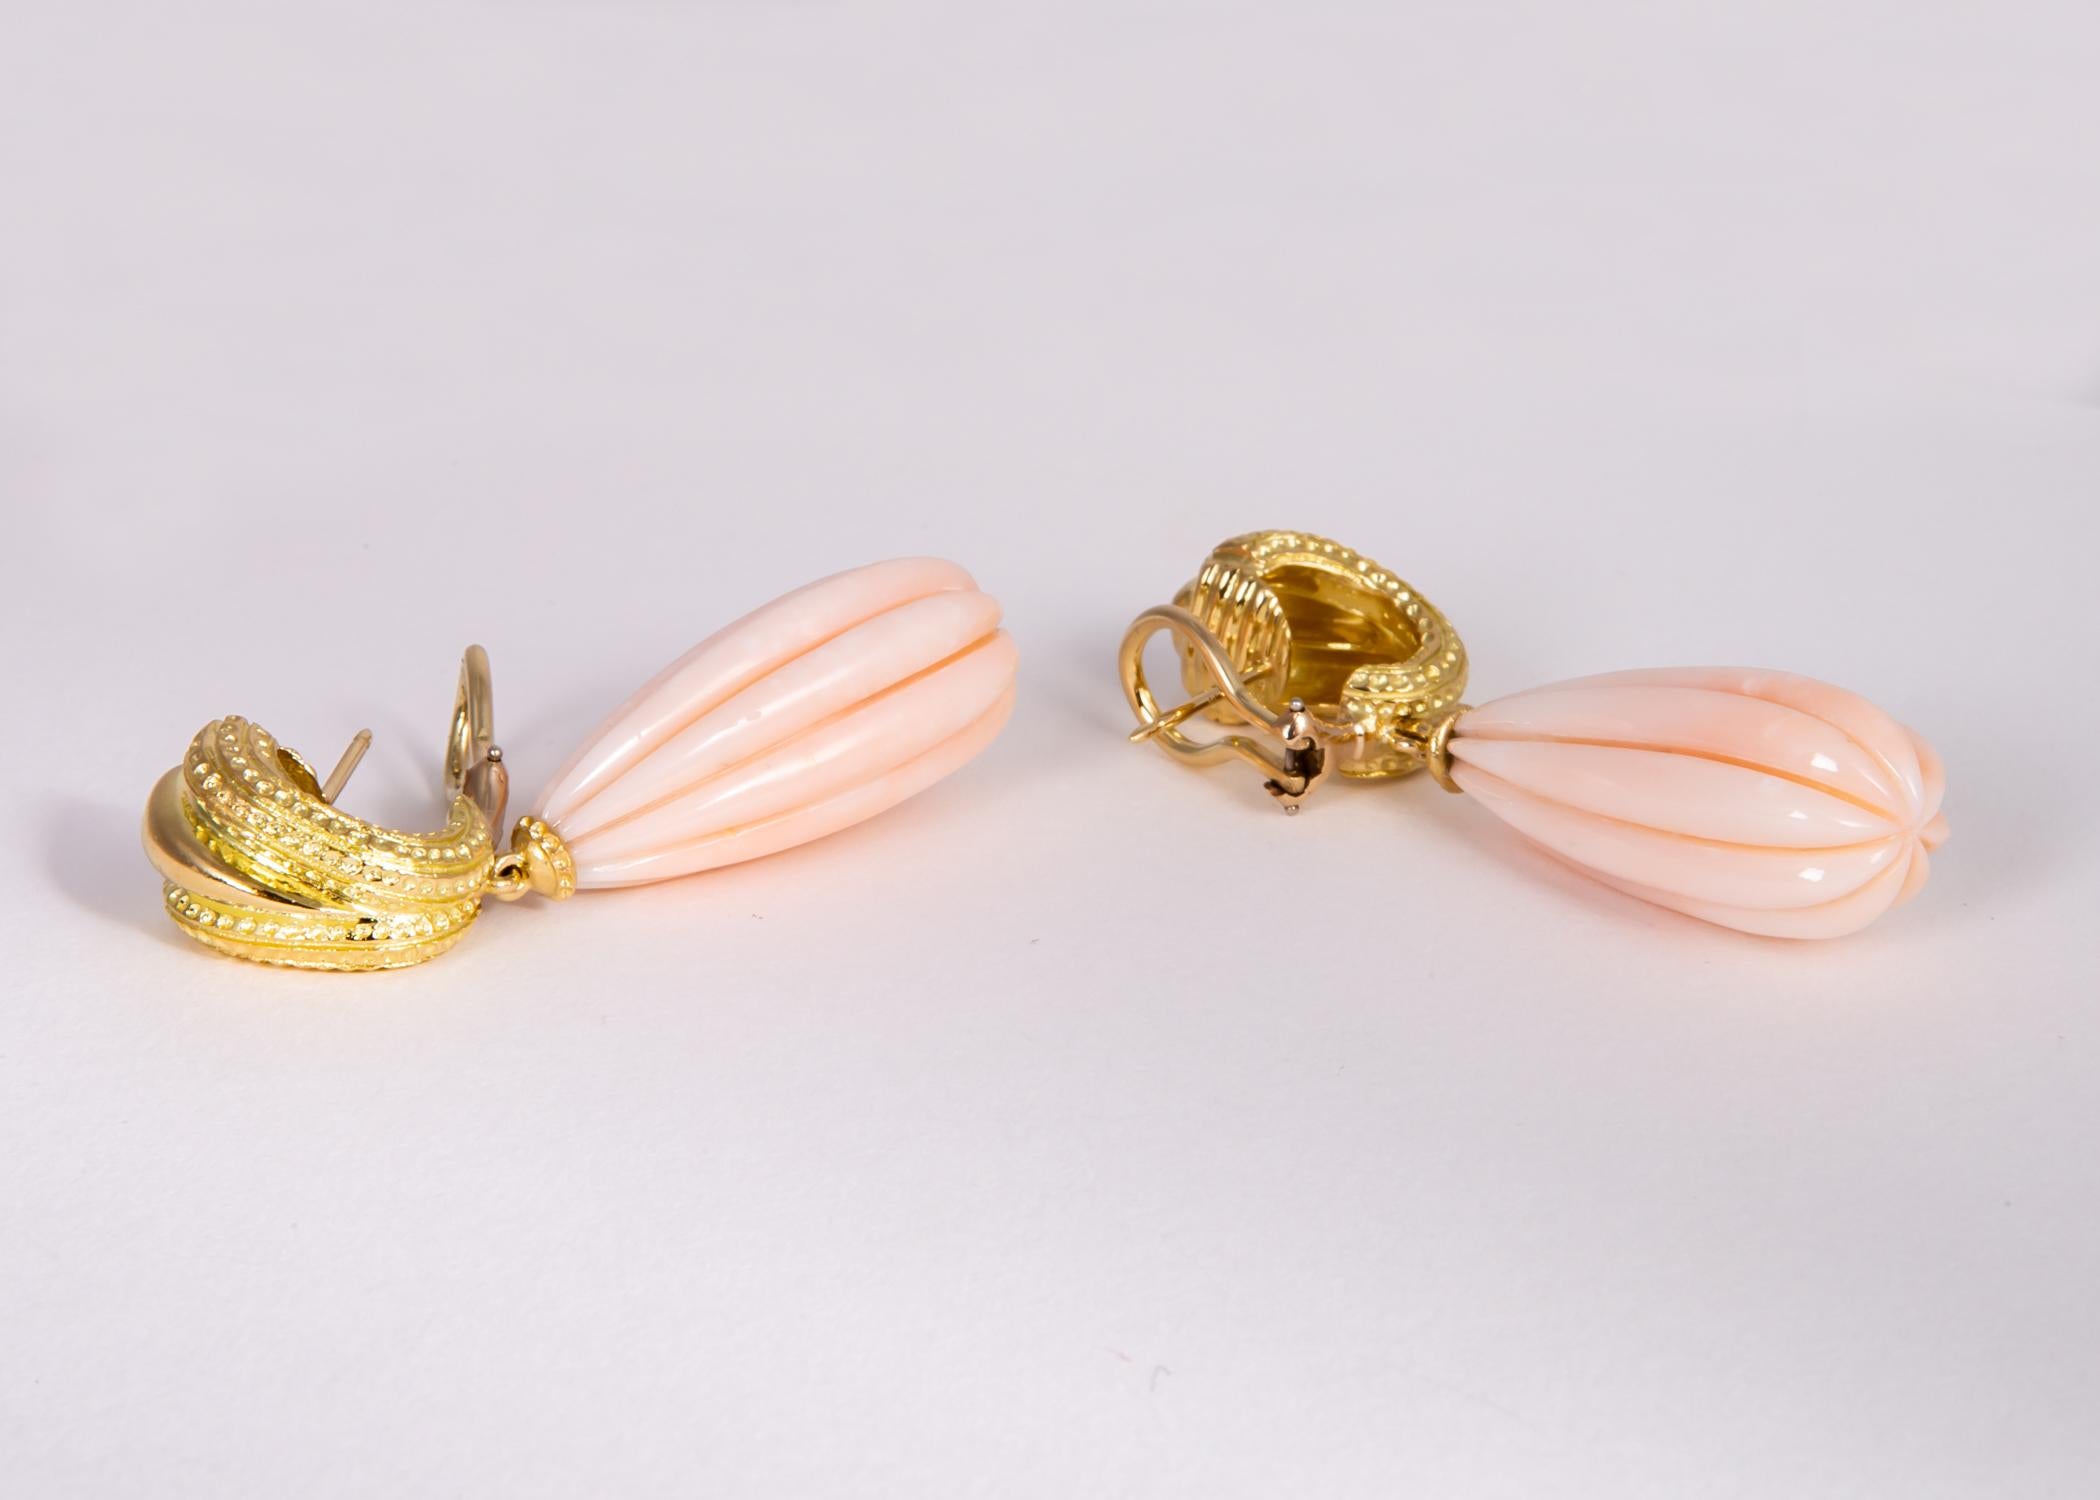 This elegant pair of vintage Tiffany & Co. earrings feature a pair of fluted angel skin coral with rarely seen completely even tone coloration. 2 inches in length.